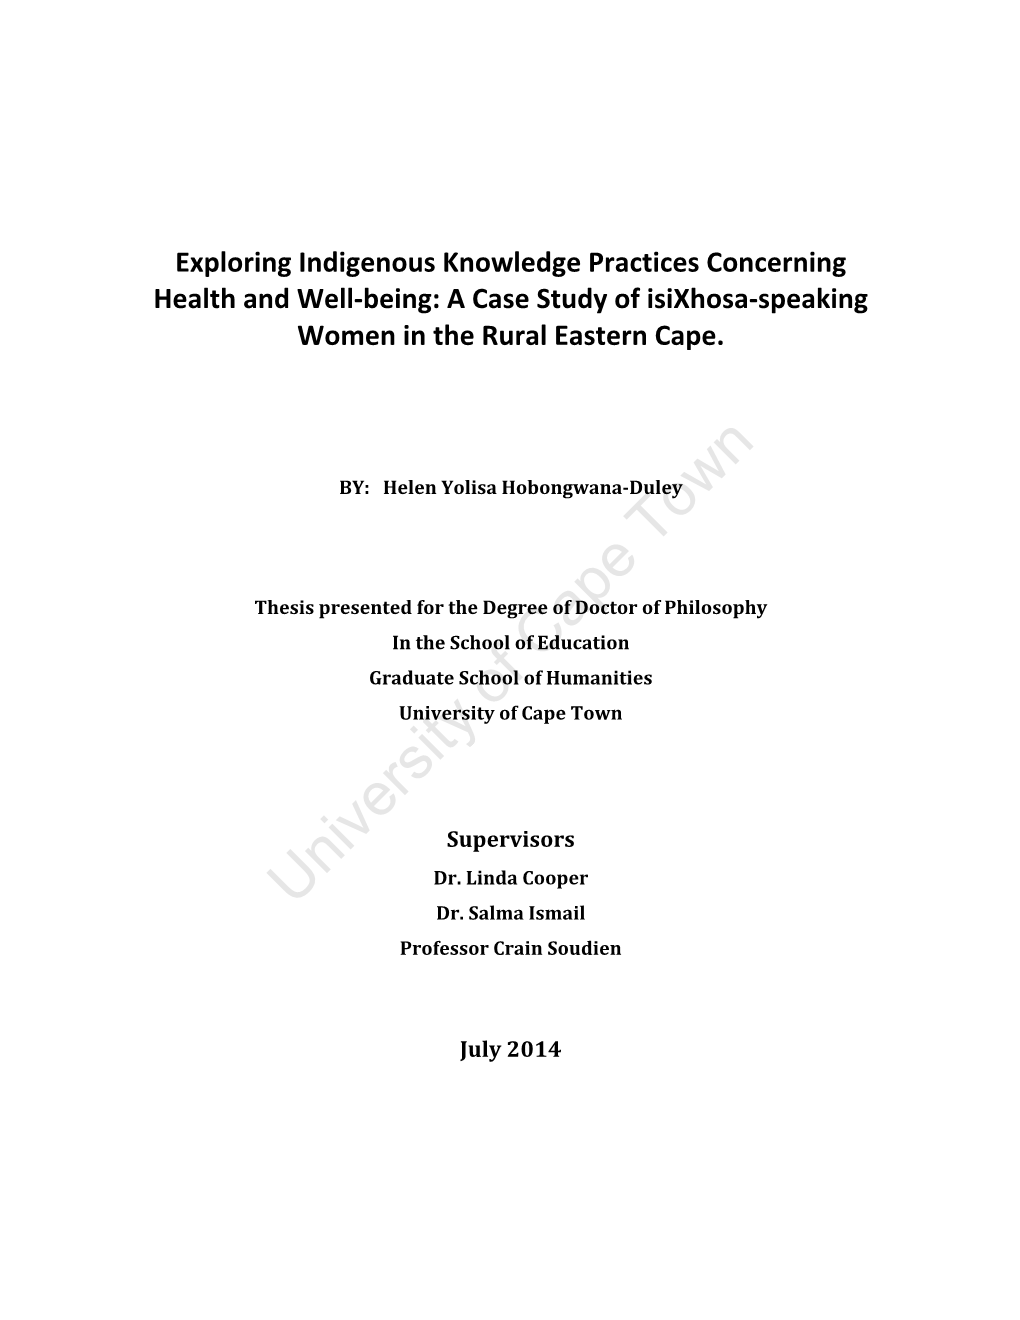 Exploring Indigenous Knowledge Practices Concerning Health and Well-Being: a Case Study of Isixhosa-Speaking Women in the Rural Eastern Cape